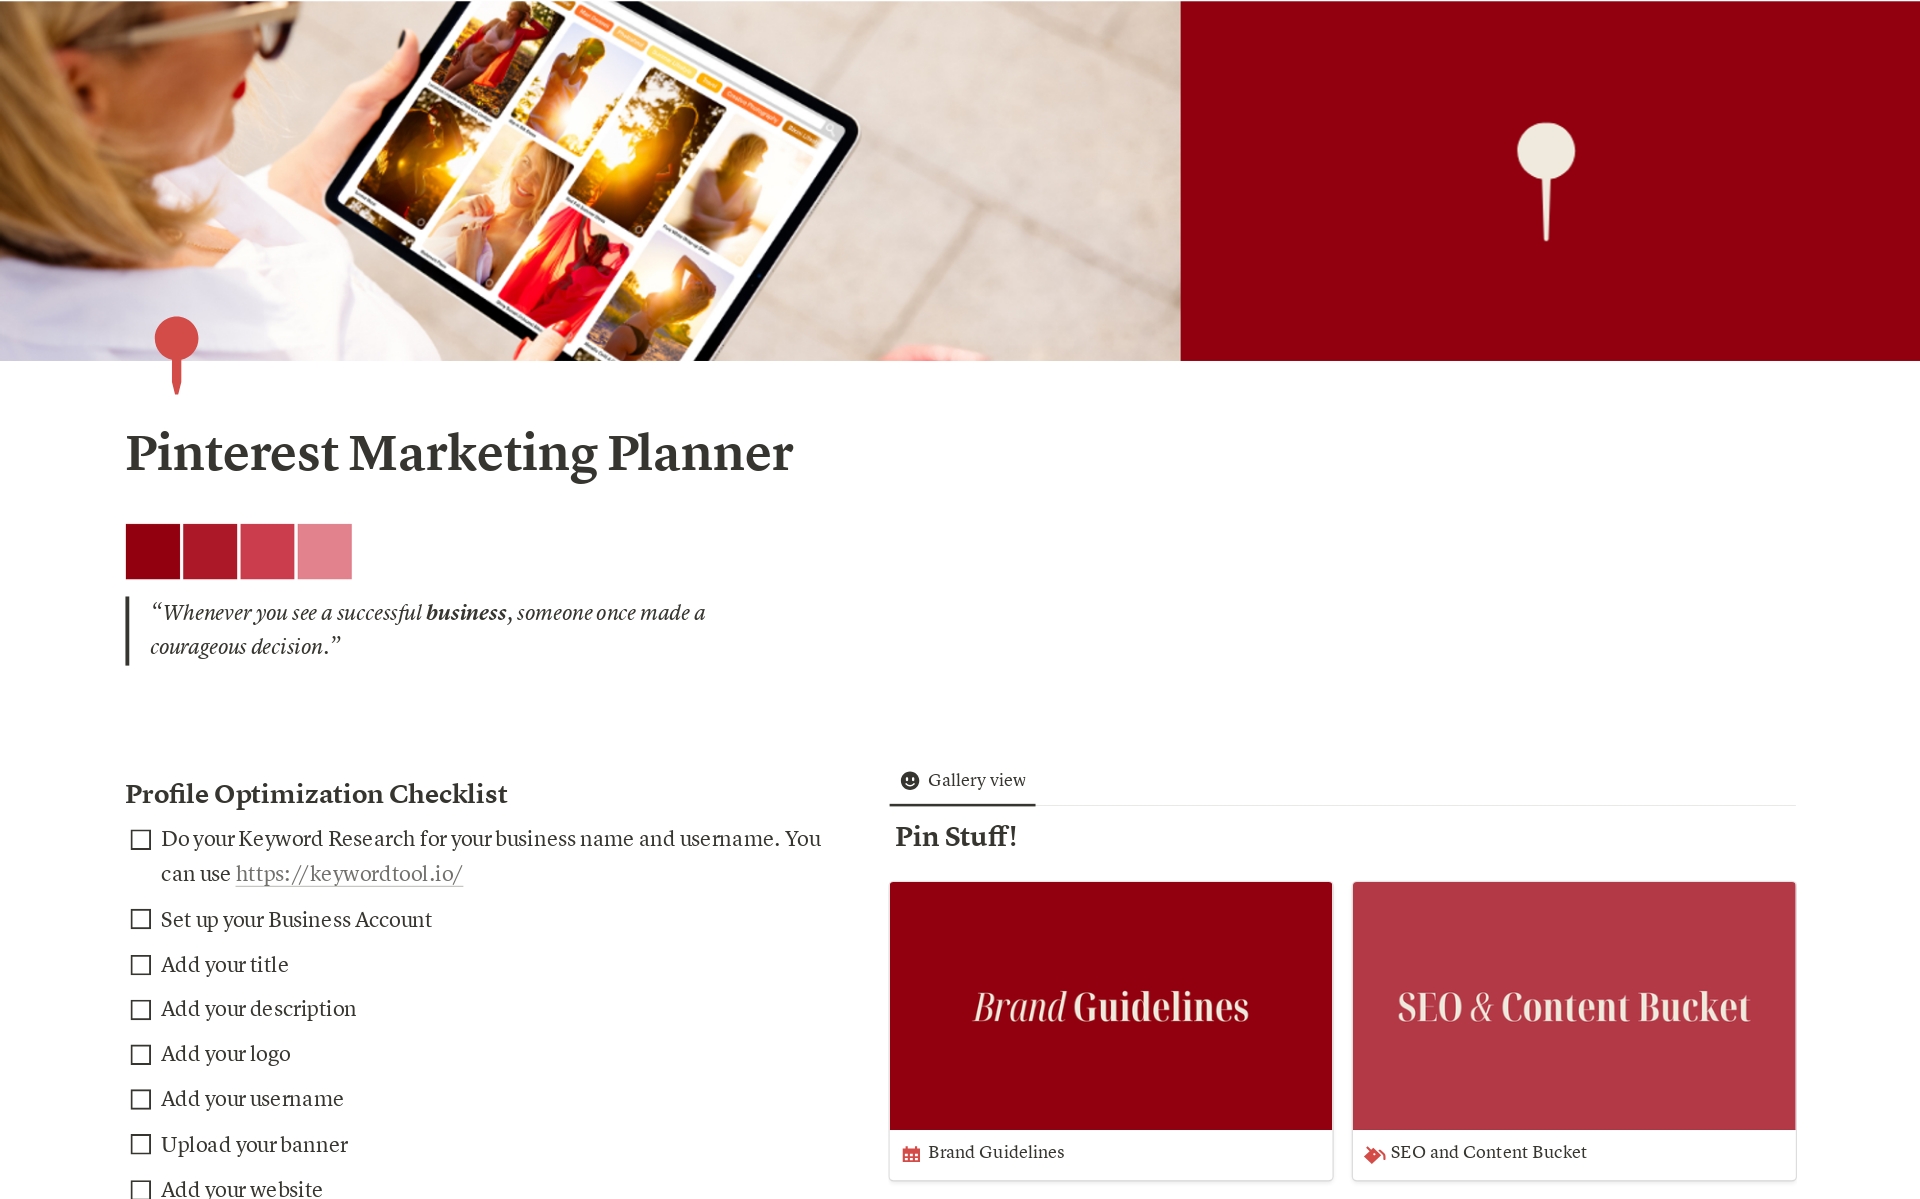 Streamline your Pinterest marketing efforts with our comprehensive template designed to boost your brand's presence and drive traffic.